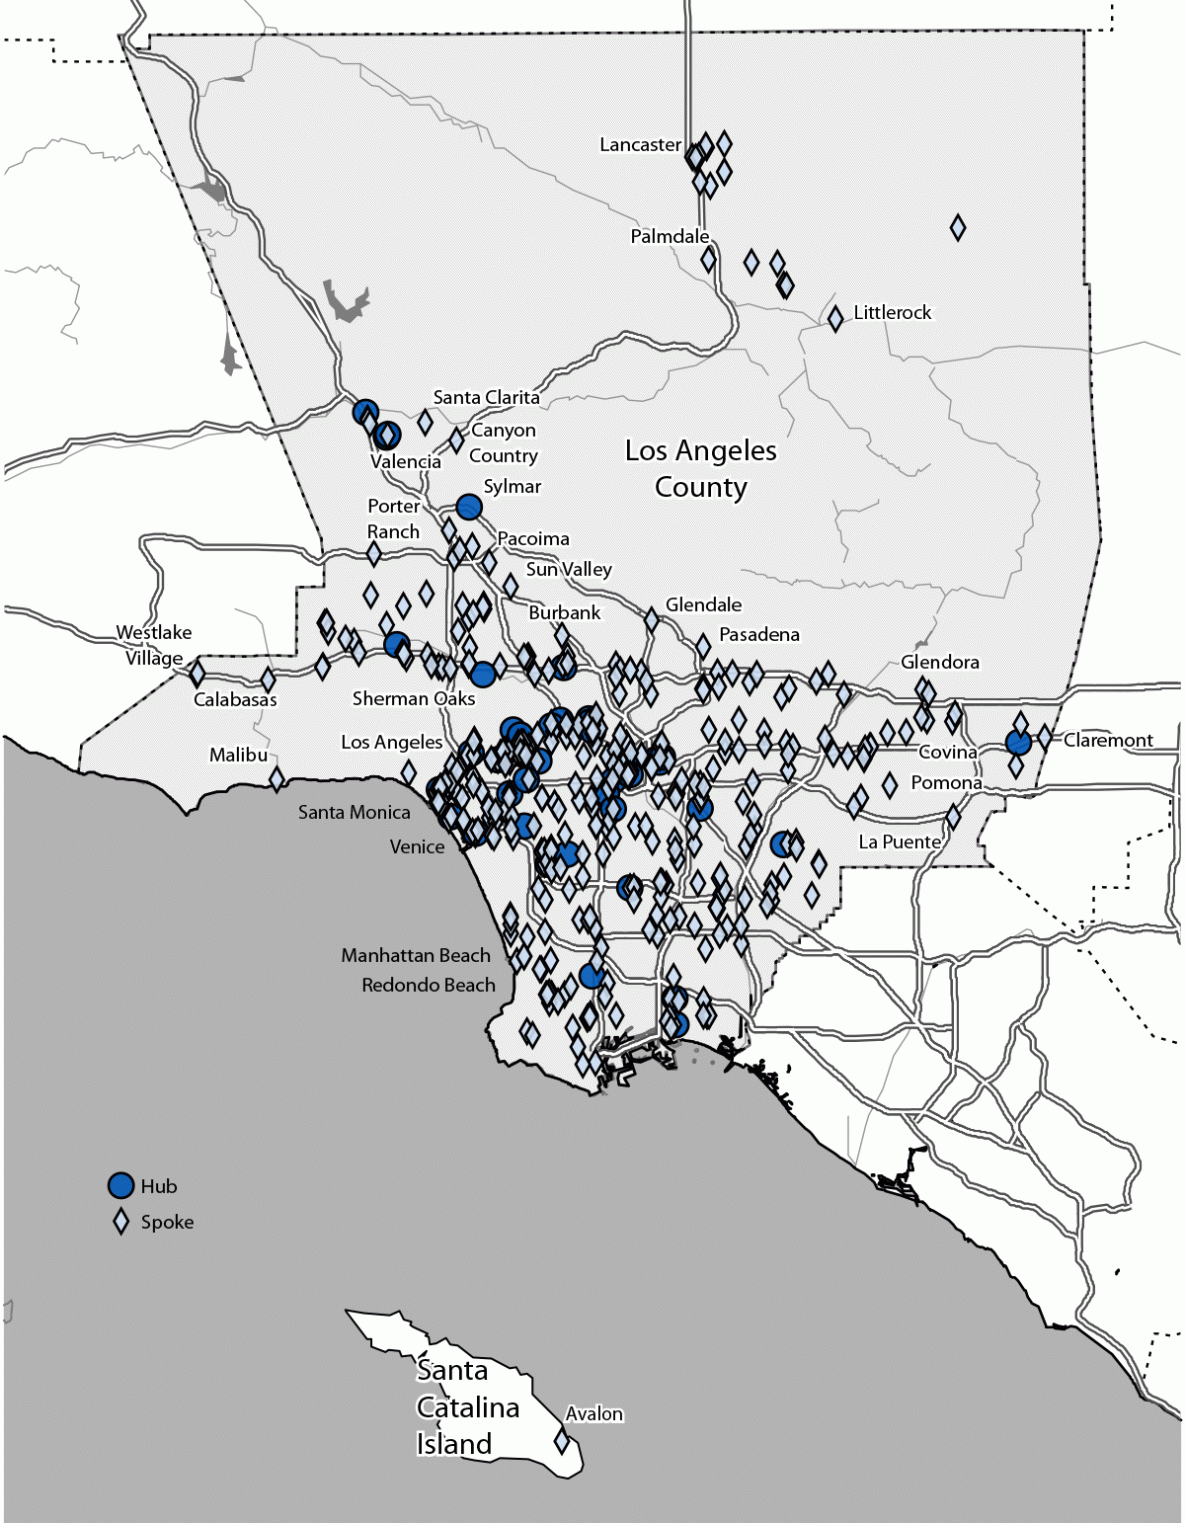 The figure is a map illustrating tecovirimat hub and spoke provider sites in Los Angeles County, California, during June 2022–January 2023.